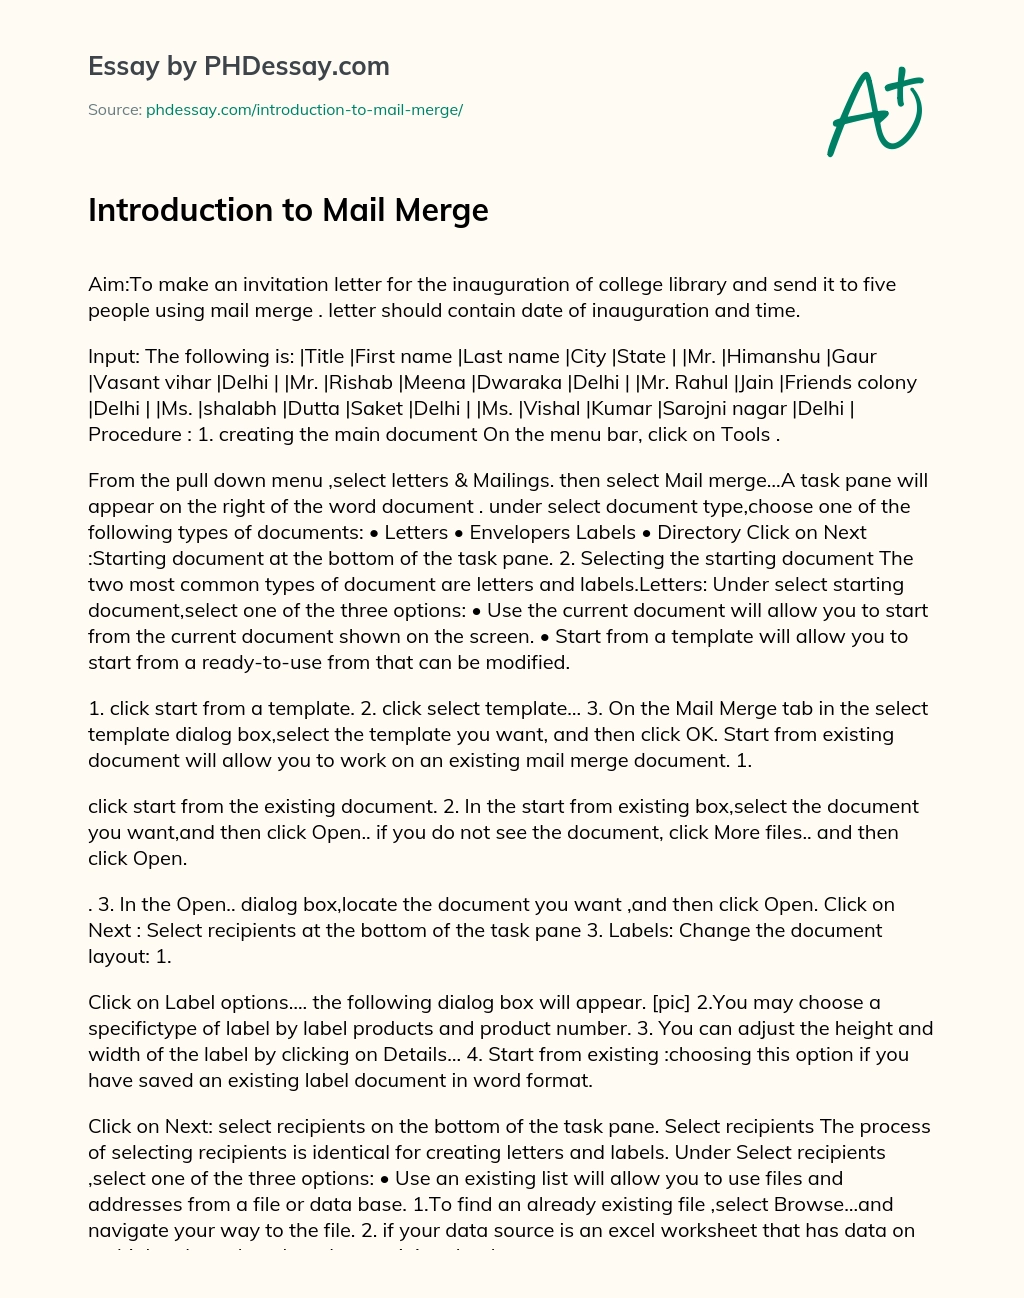 Introduction to Mail Merge essay